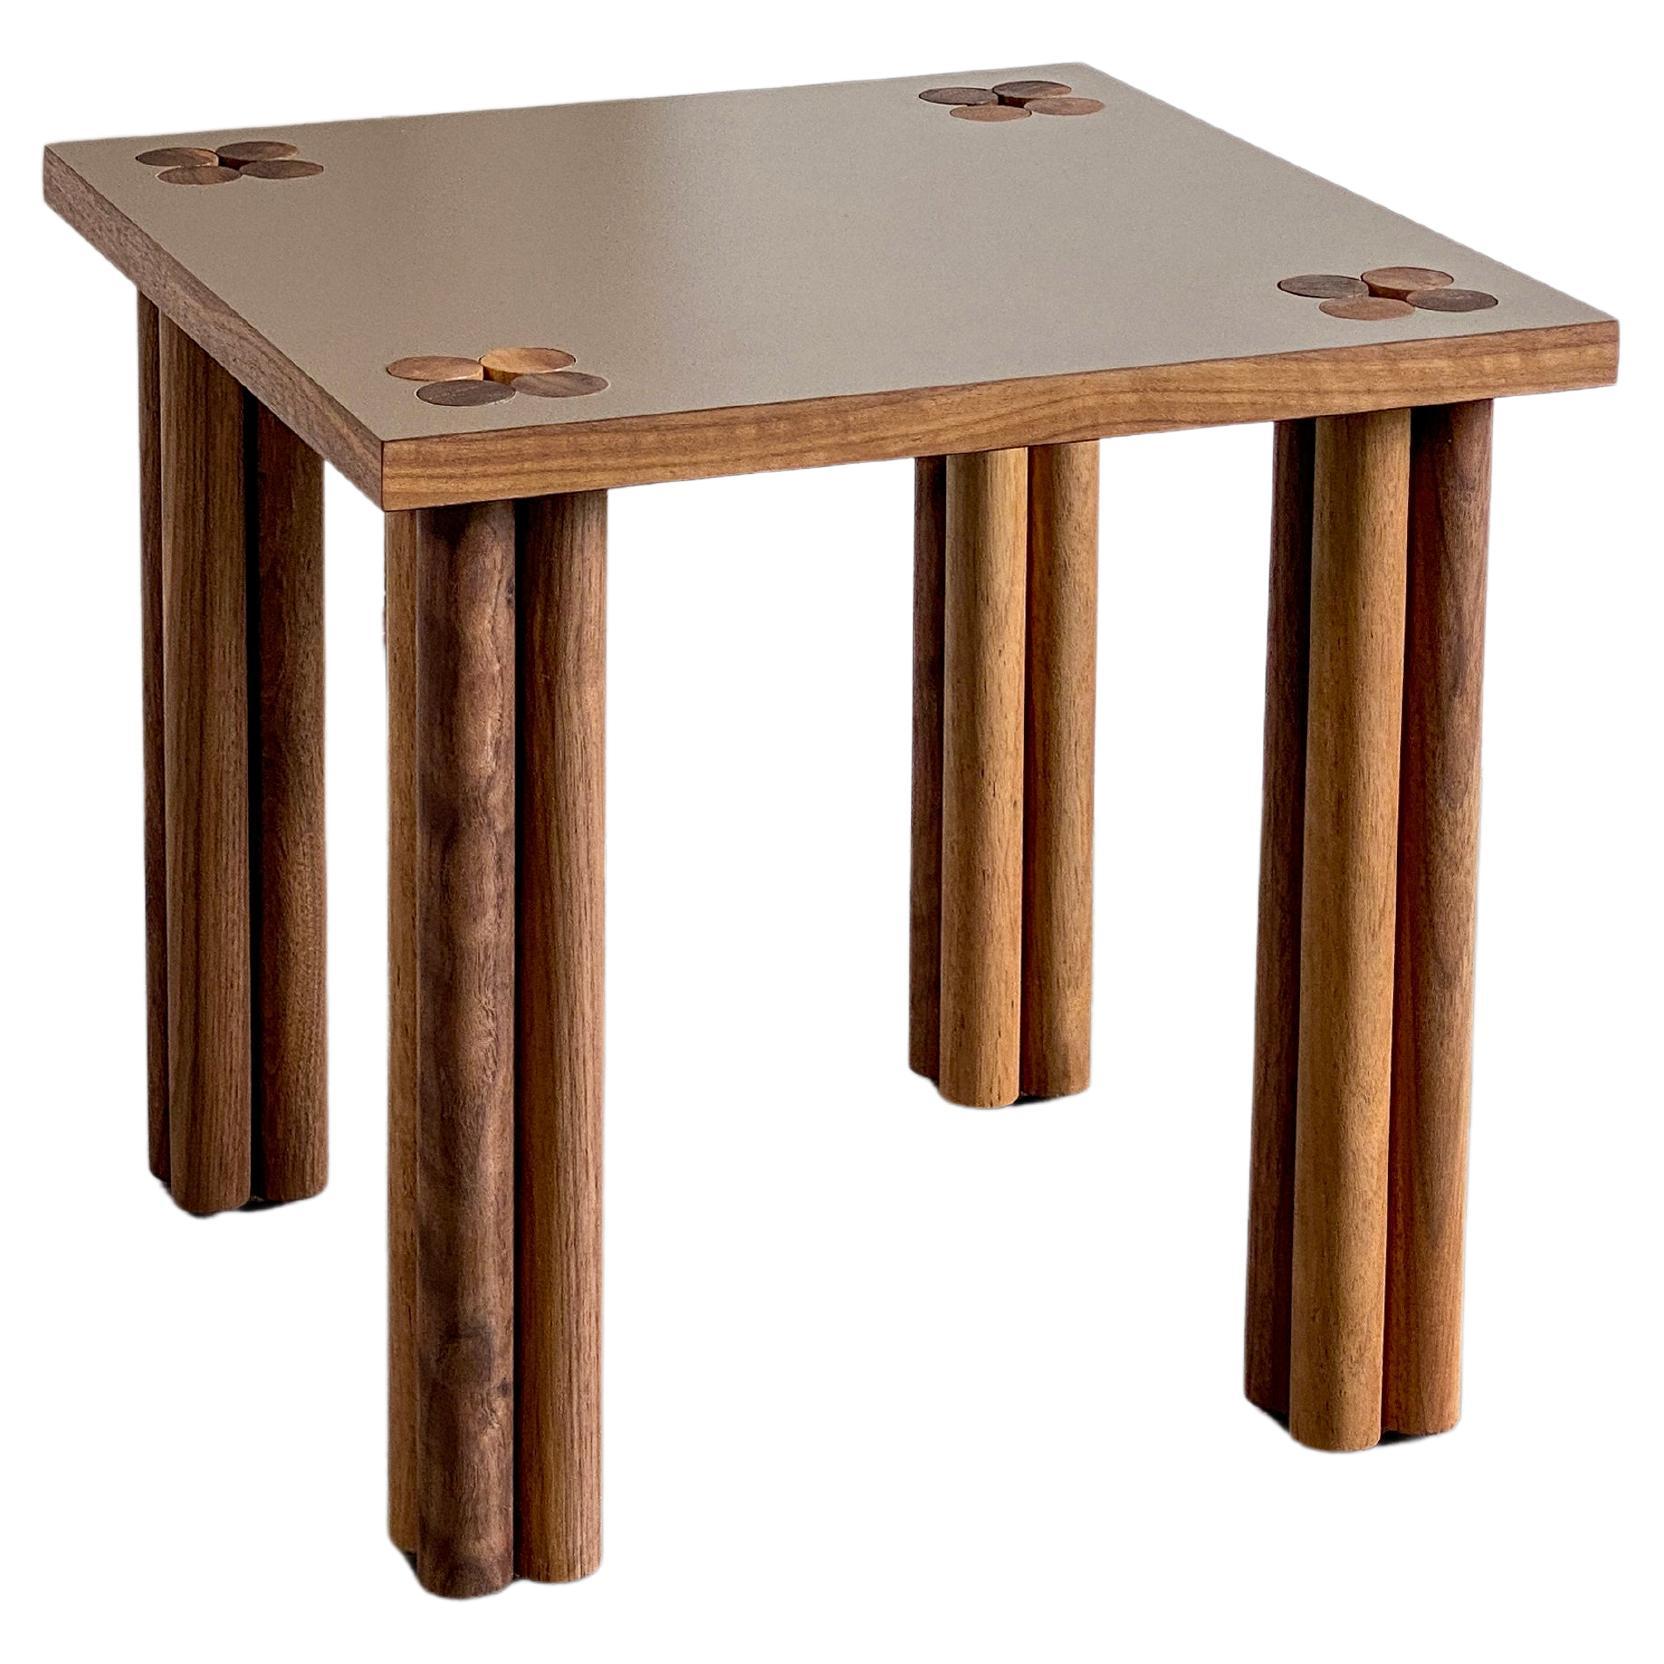 Beige Hana Side Table by Tino Seubert For Sale